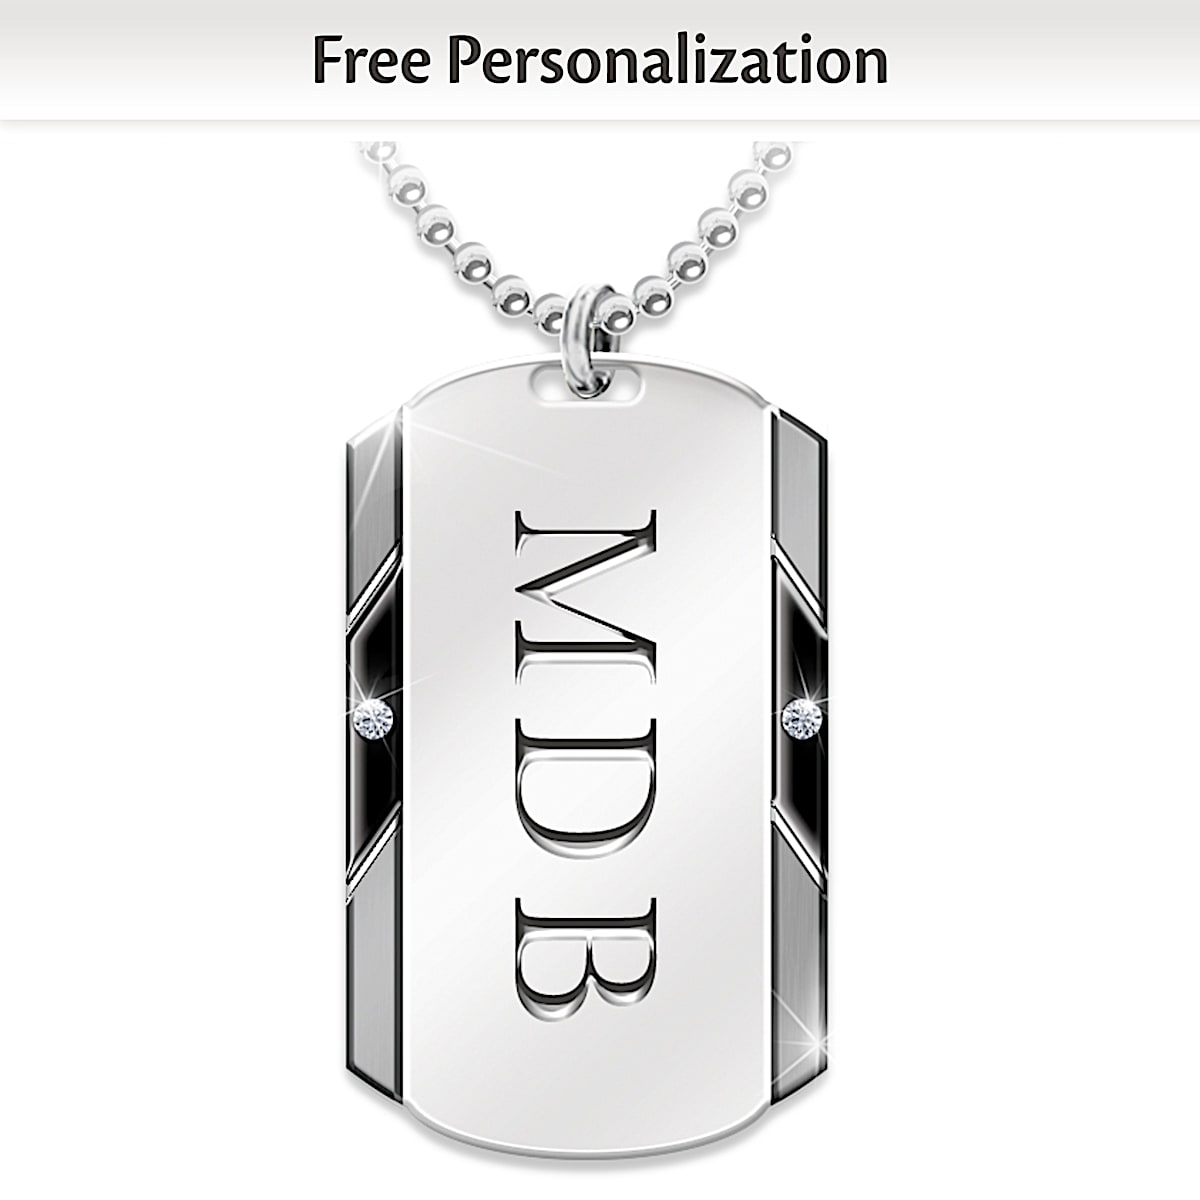 Personalized Gold Dog Tag Pendants Set of 2 Custom Engraved Free - Ships  from USA